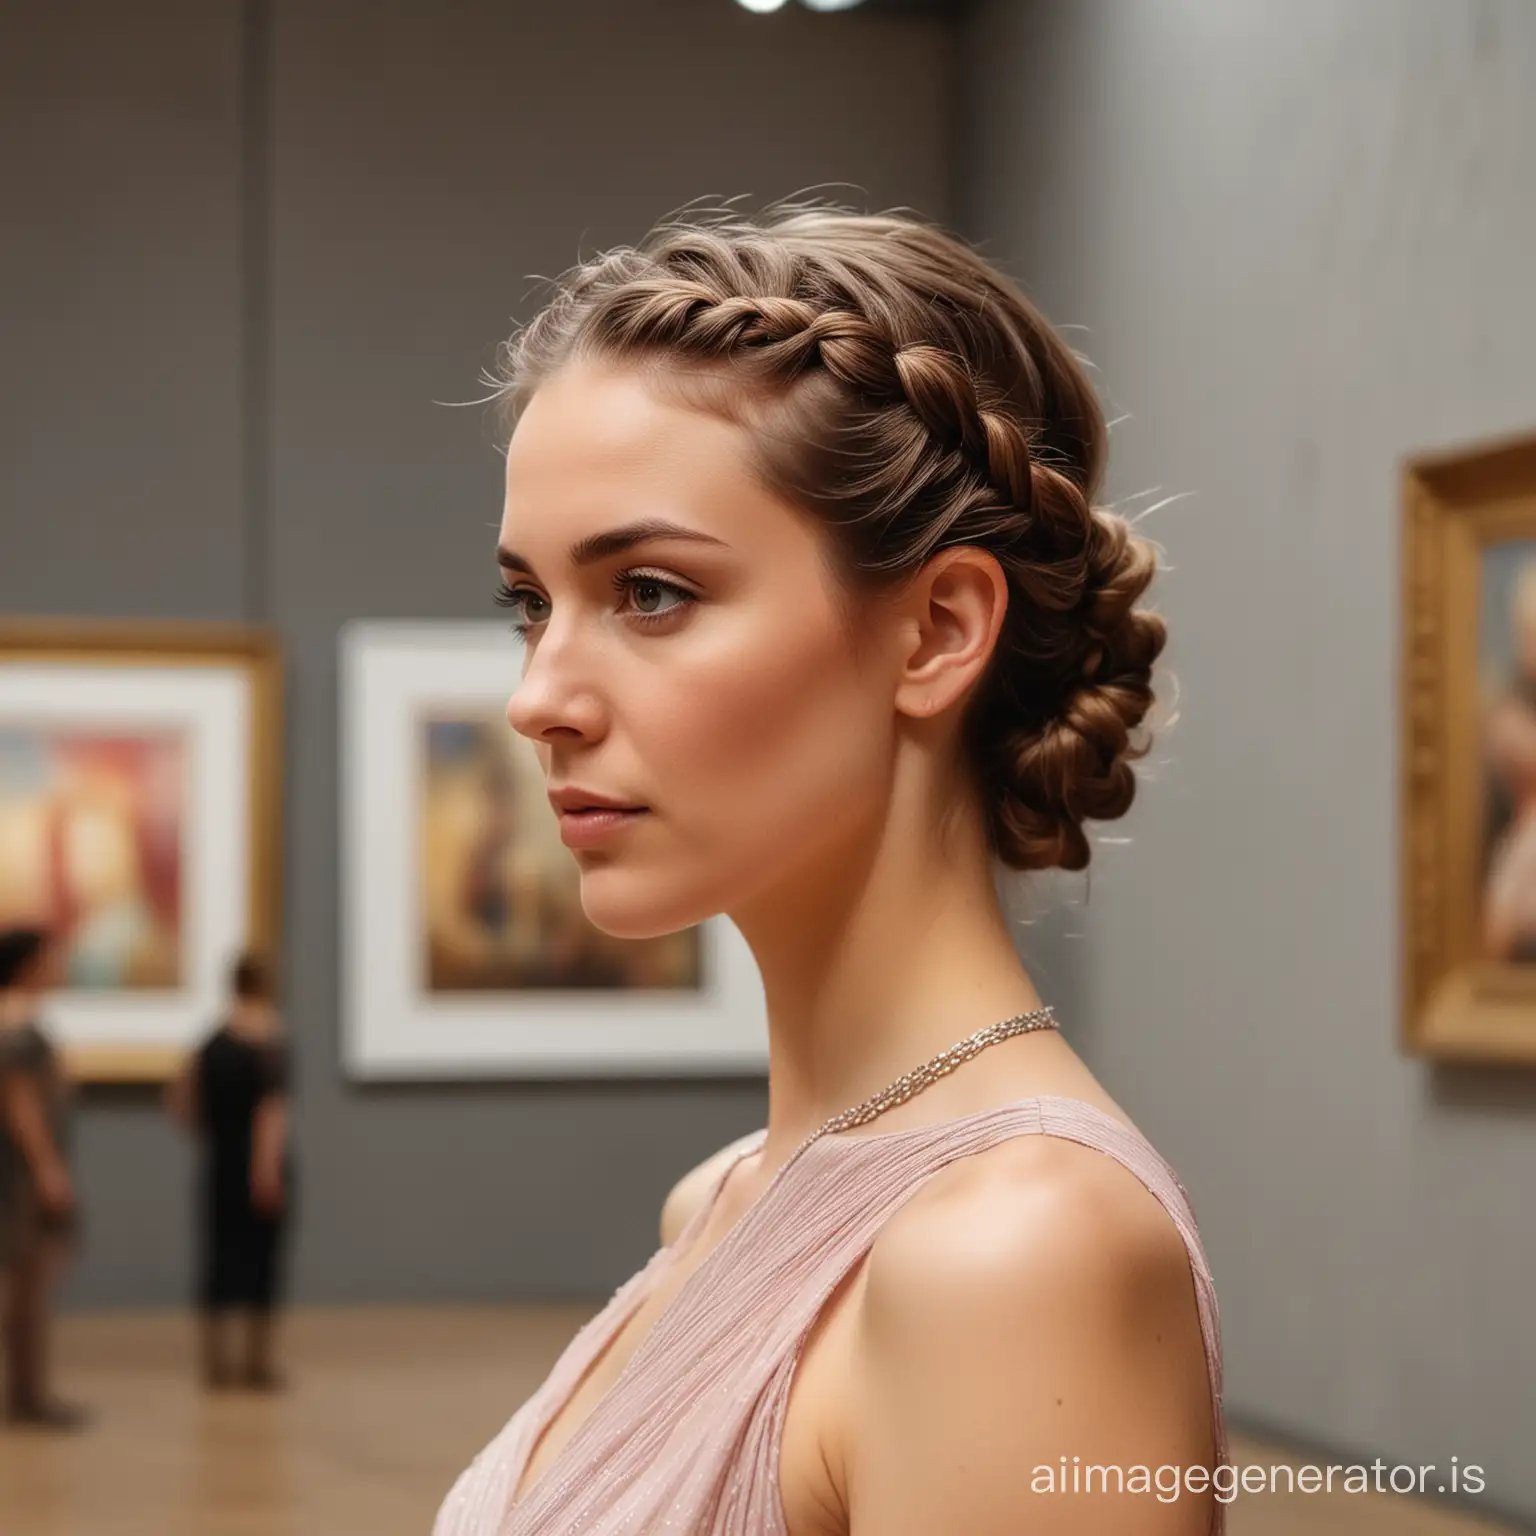 Elegant-Woman-with-Braided-Hair-Admiring-Paintings-in-Modern-Exhibition-Hall